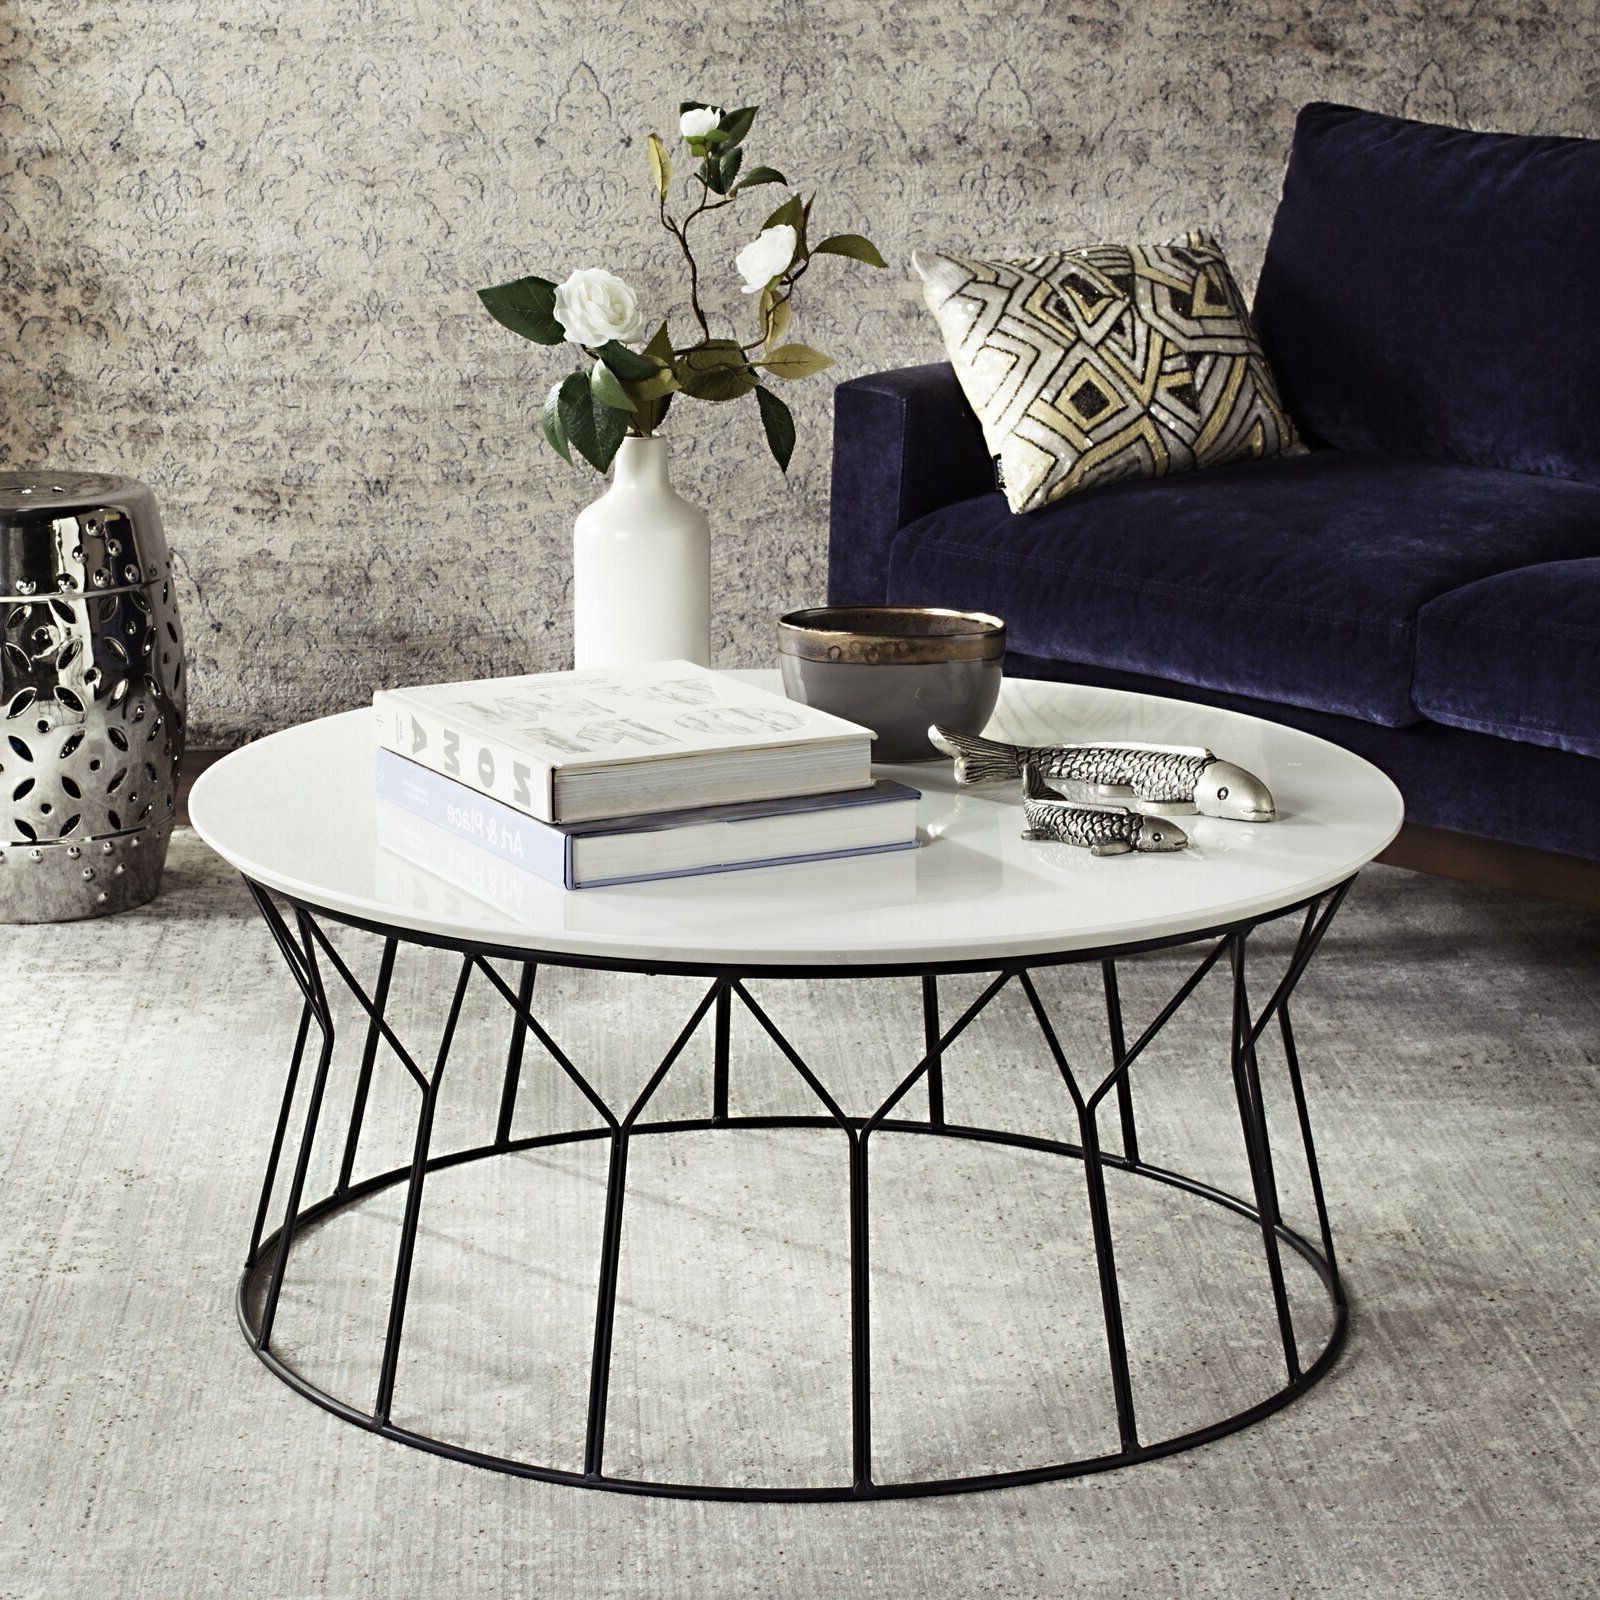 Most Popular Iron Coffee Tables Throughout Wood And Wrought Iron Coffee Table – Ideas On Foter (View 11 of 20)